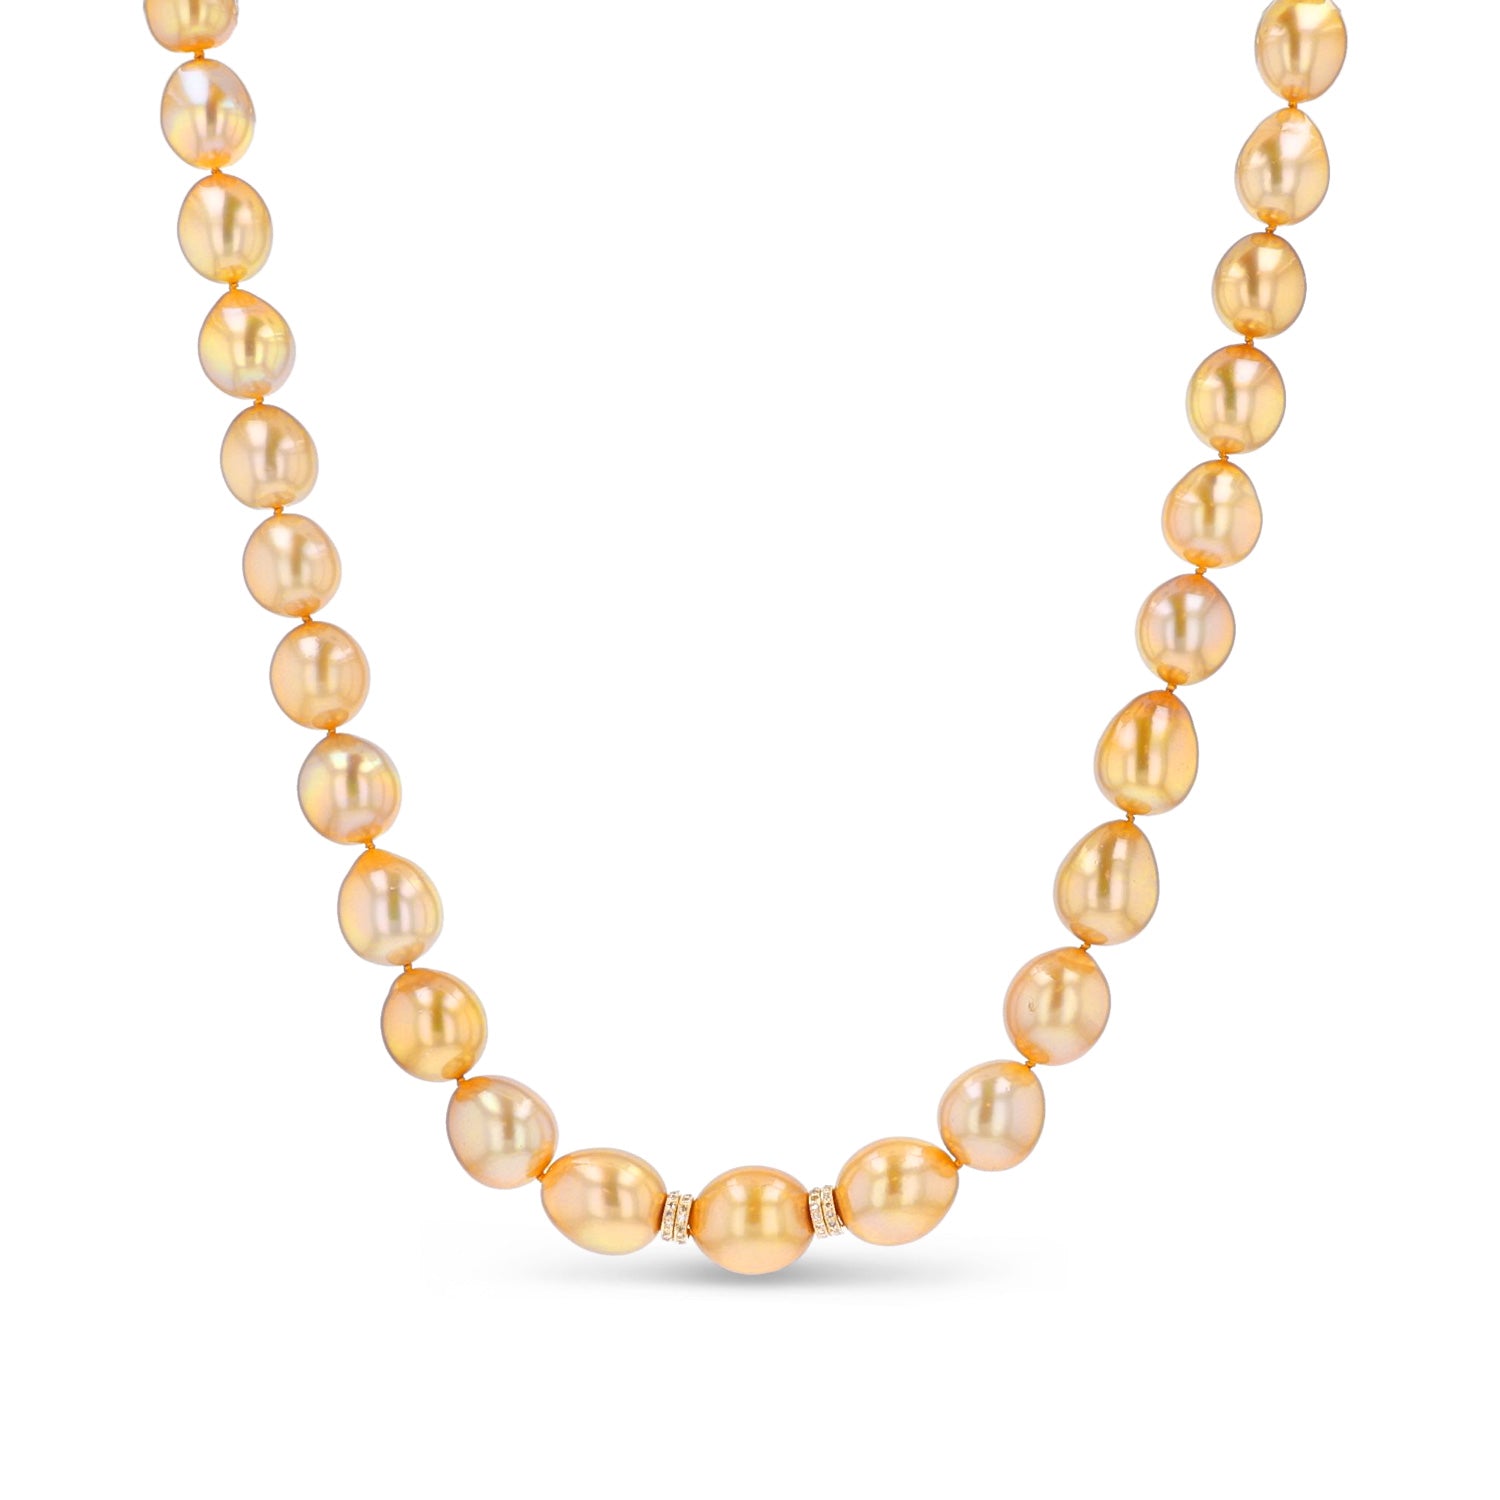 10-12mm Baroque Shaped Golden South Sea Pearl Necklace - AAA Quality -  Pearls of Joy